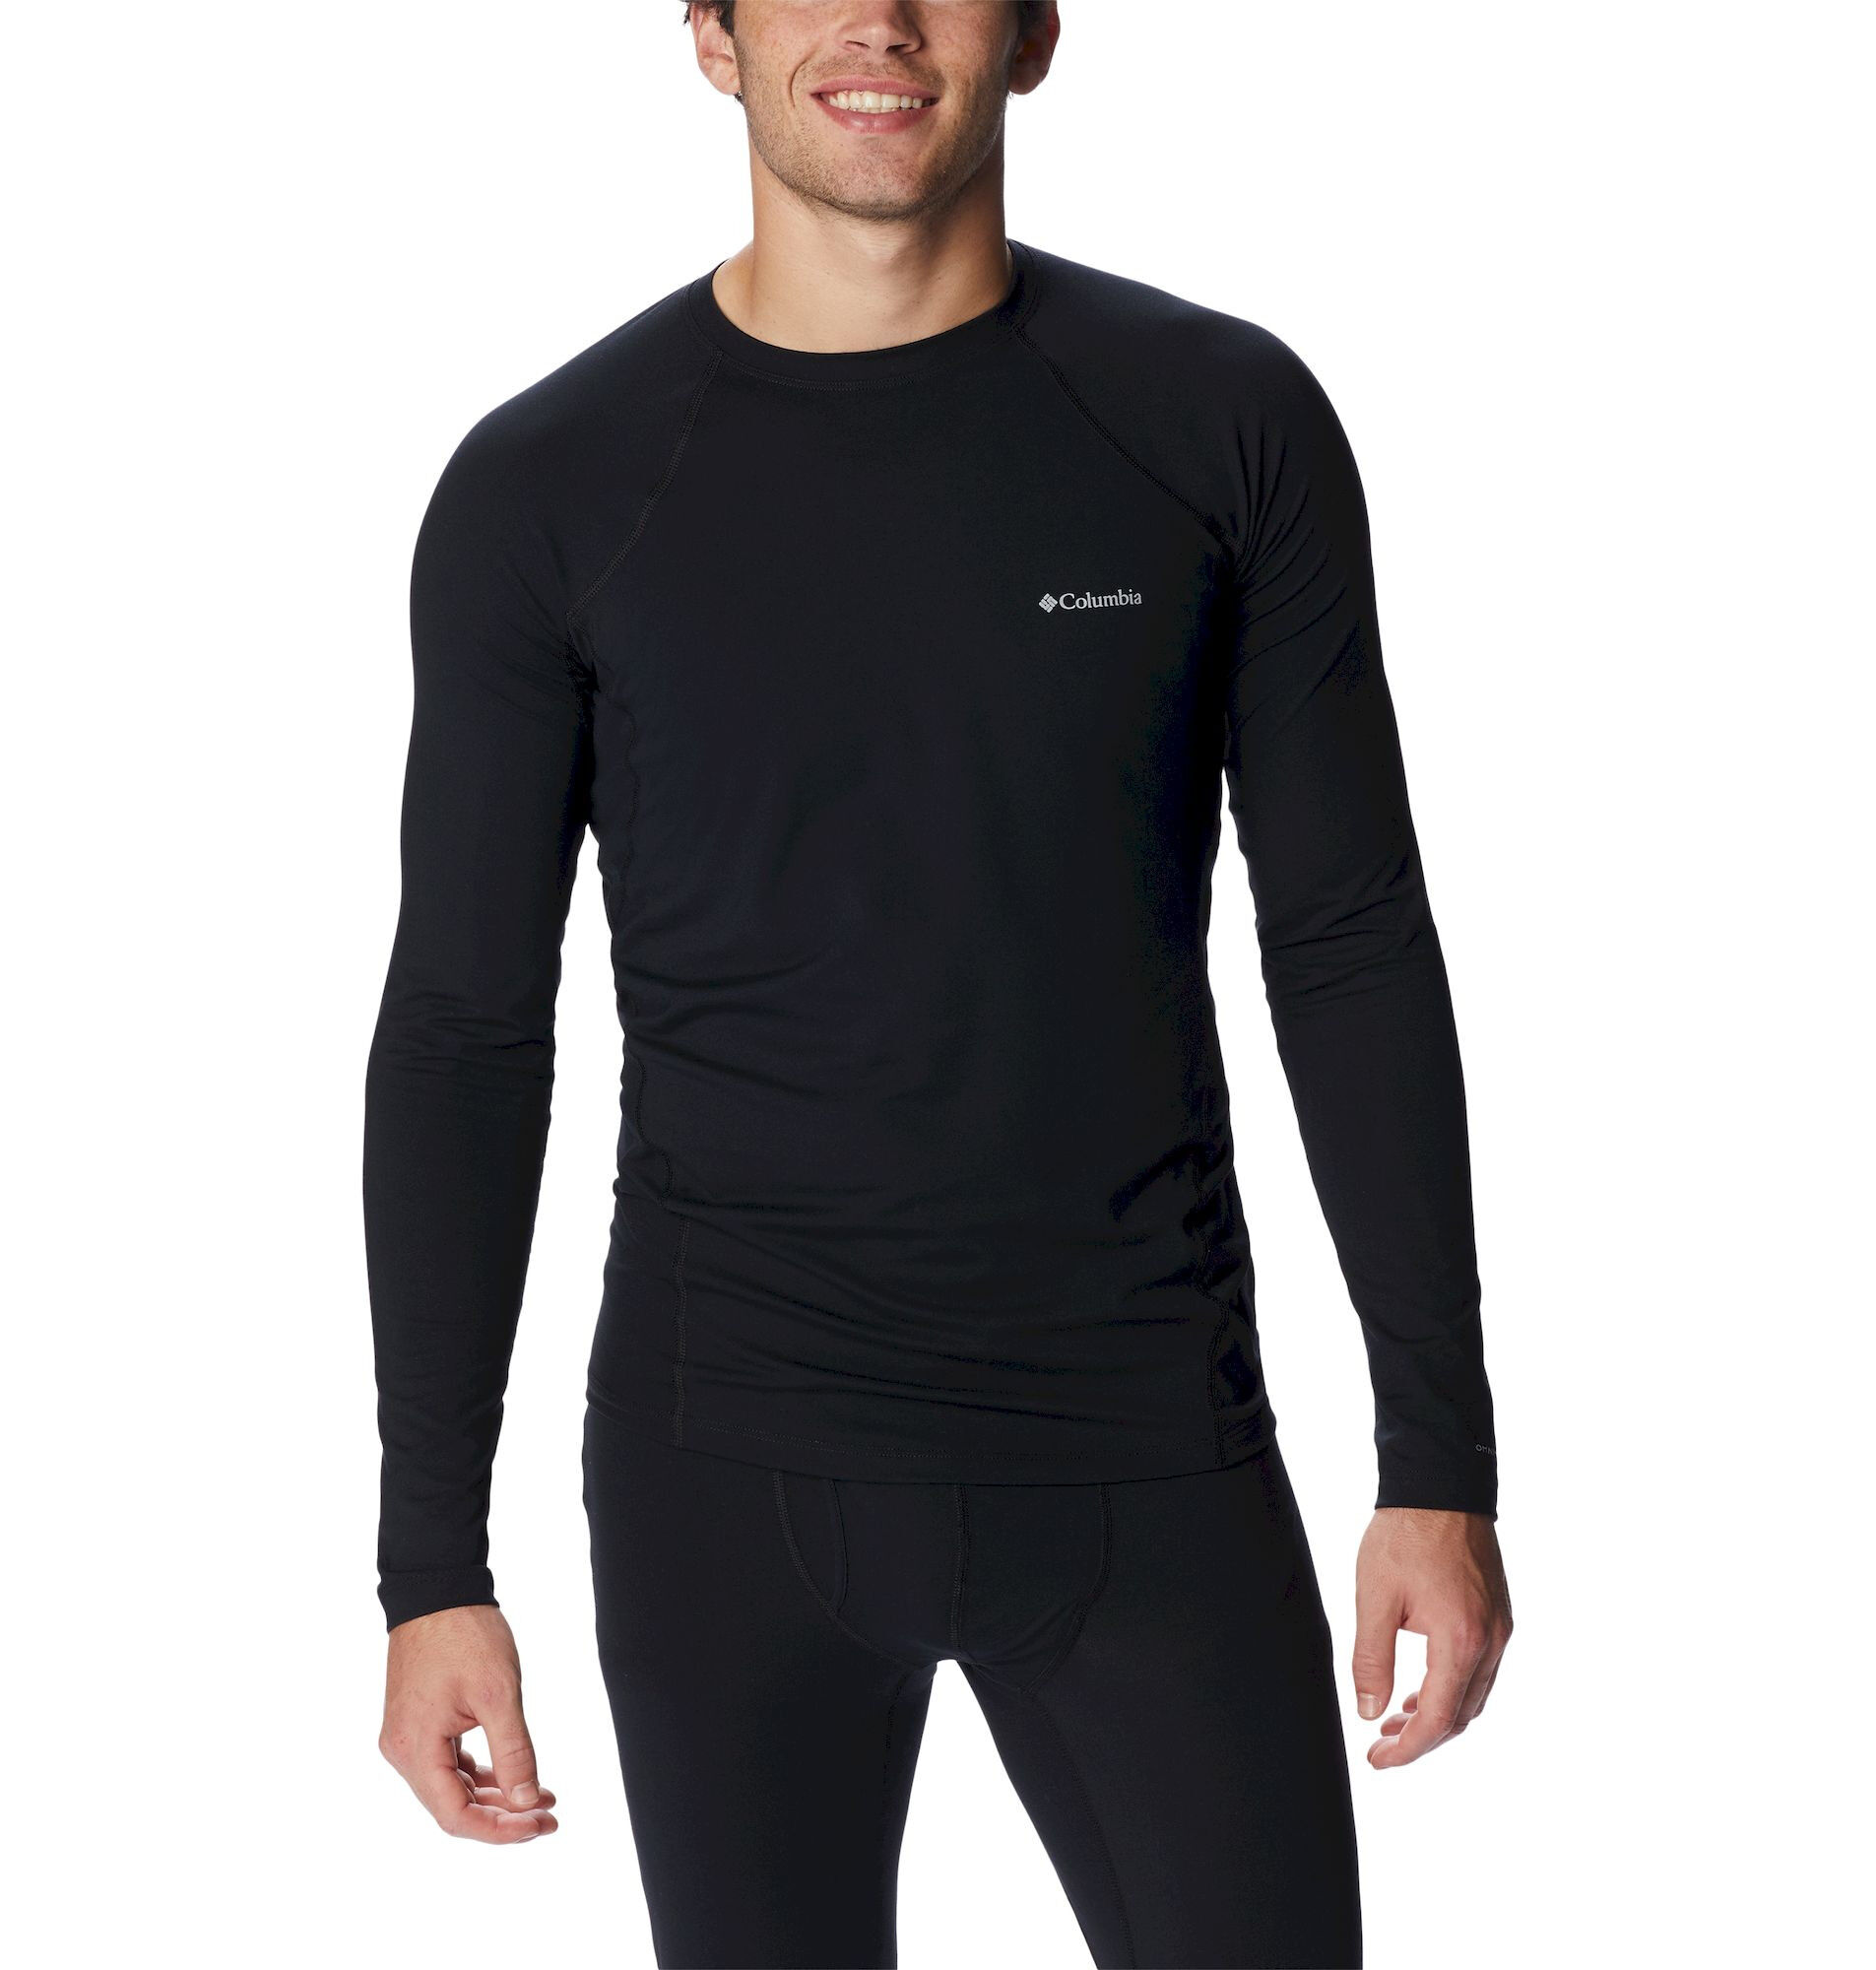 Columbia Midweight Stretch Long Sleeve Top - Ropa interior - Hombre